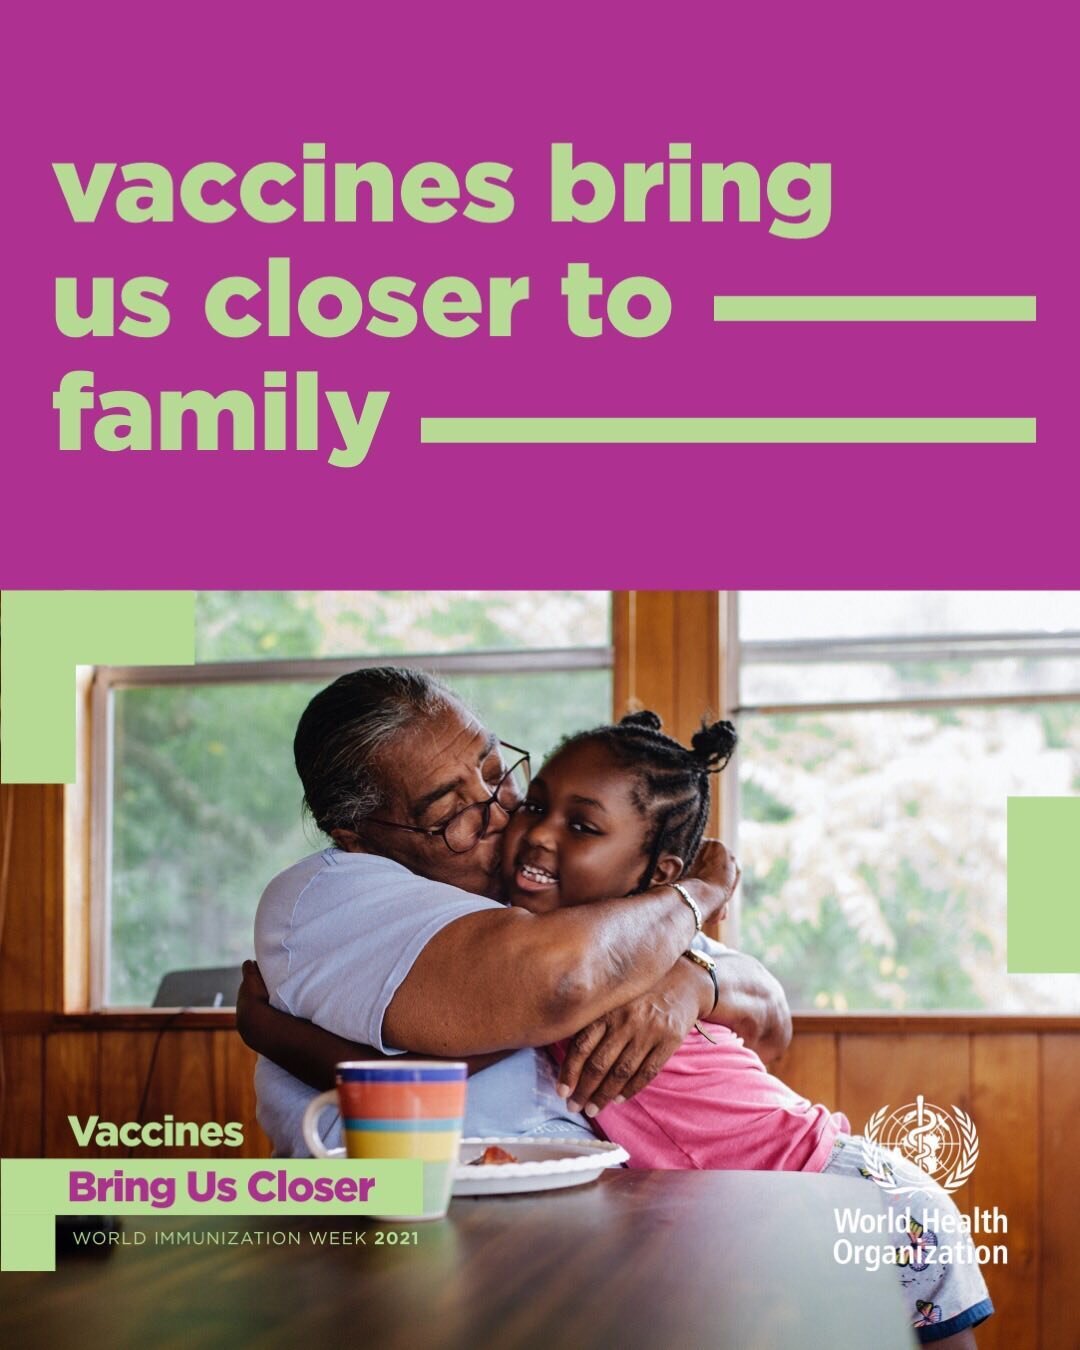 It&rsquo;s #WorldImmunizationWeek&nbsp;!

Vaccines will help us end the #COVID19 pandemic so we can finally be closer to each other again. 

#VaccinesWork&nbsp; to bring us closer.